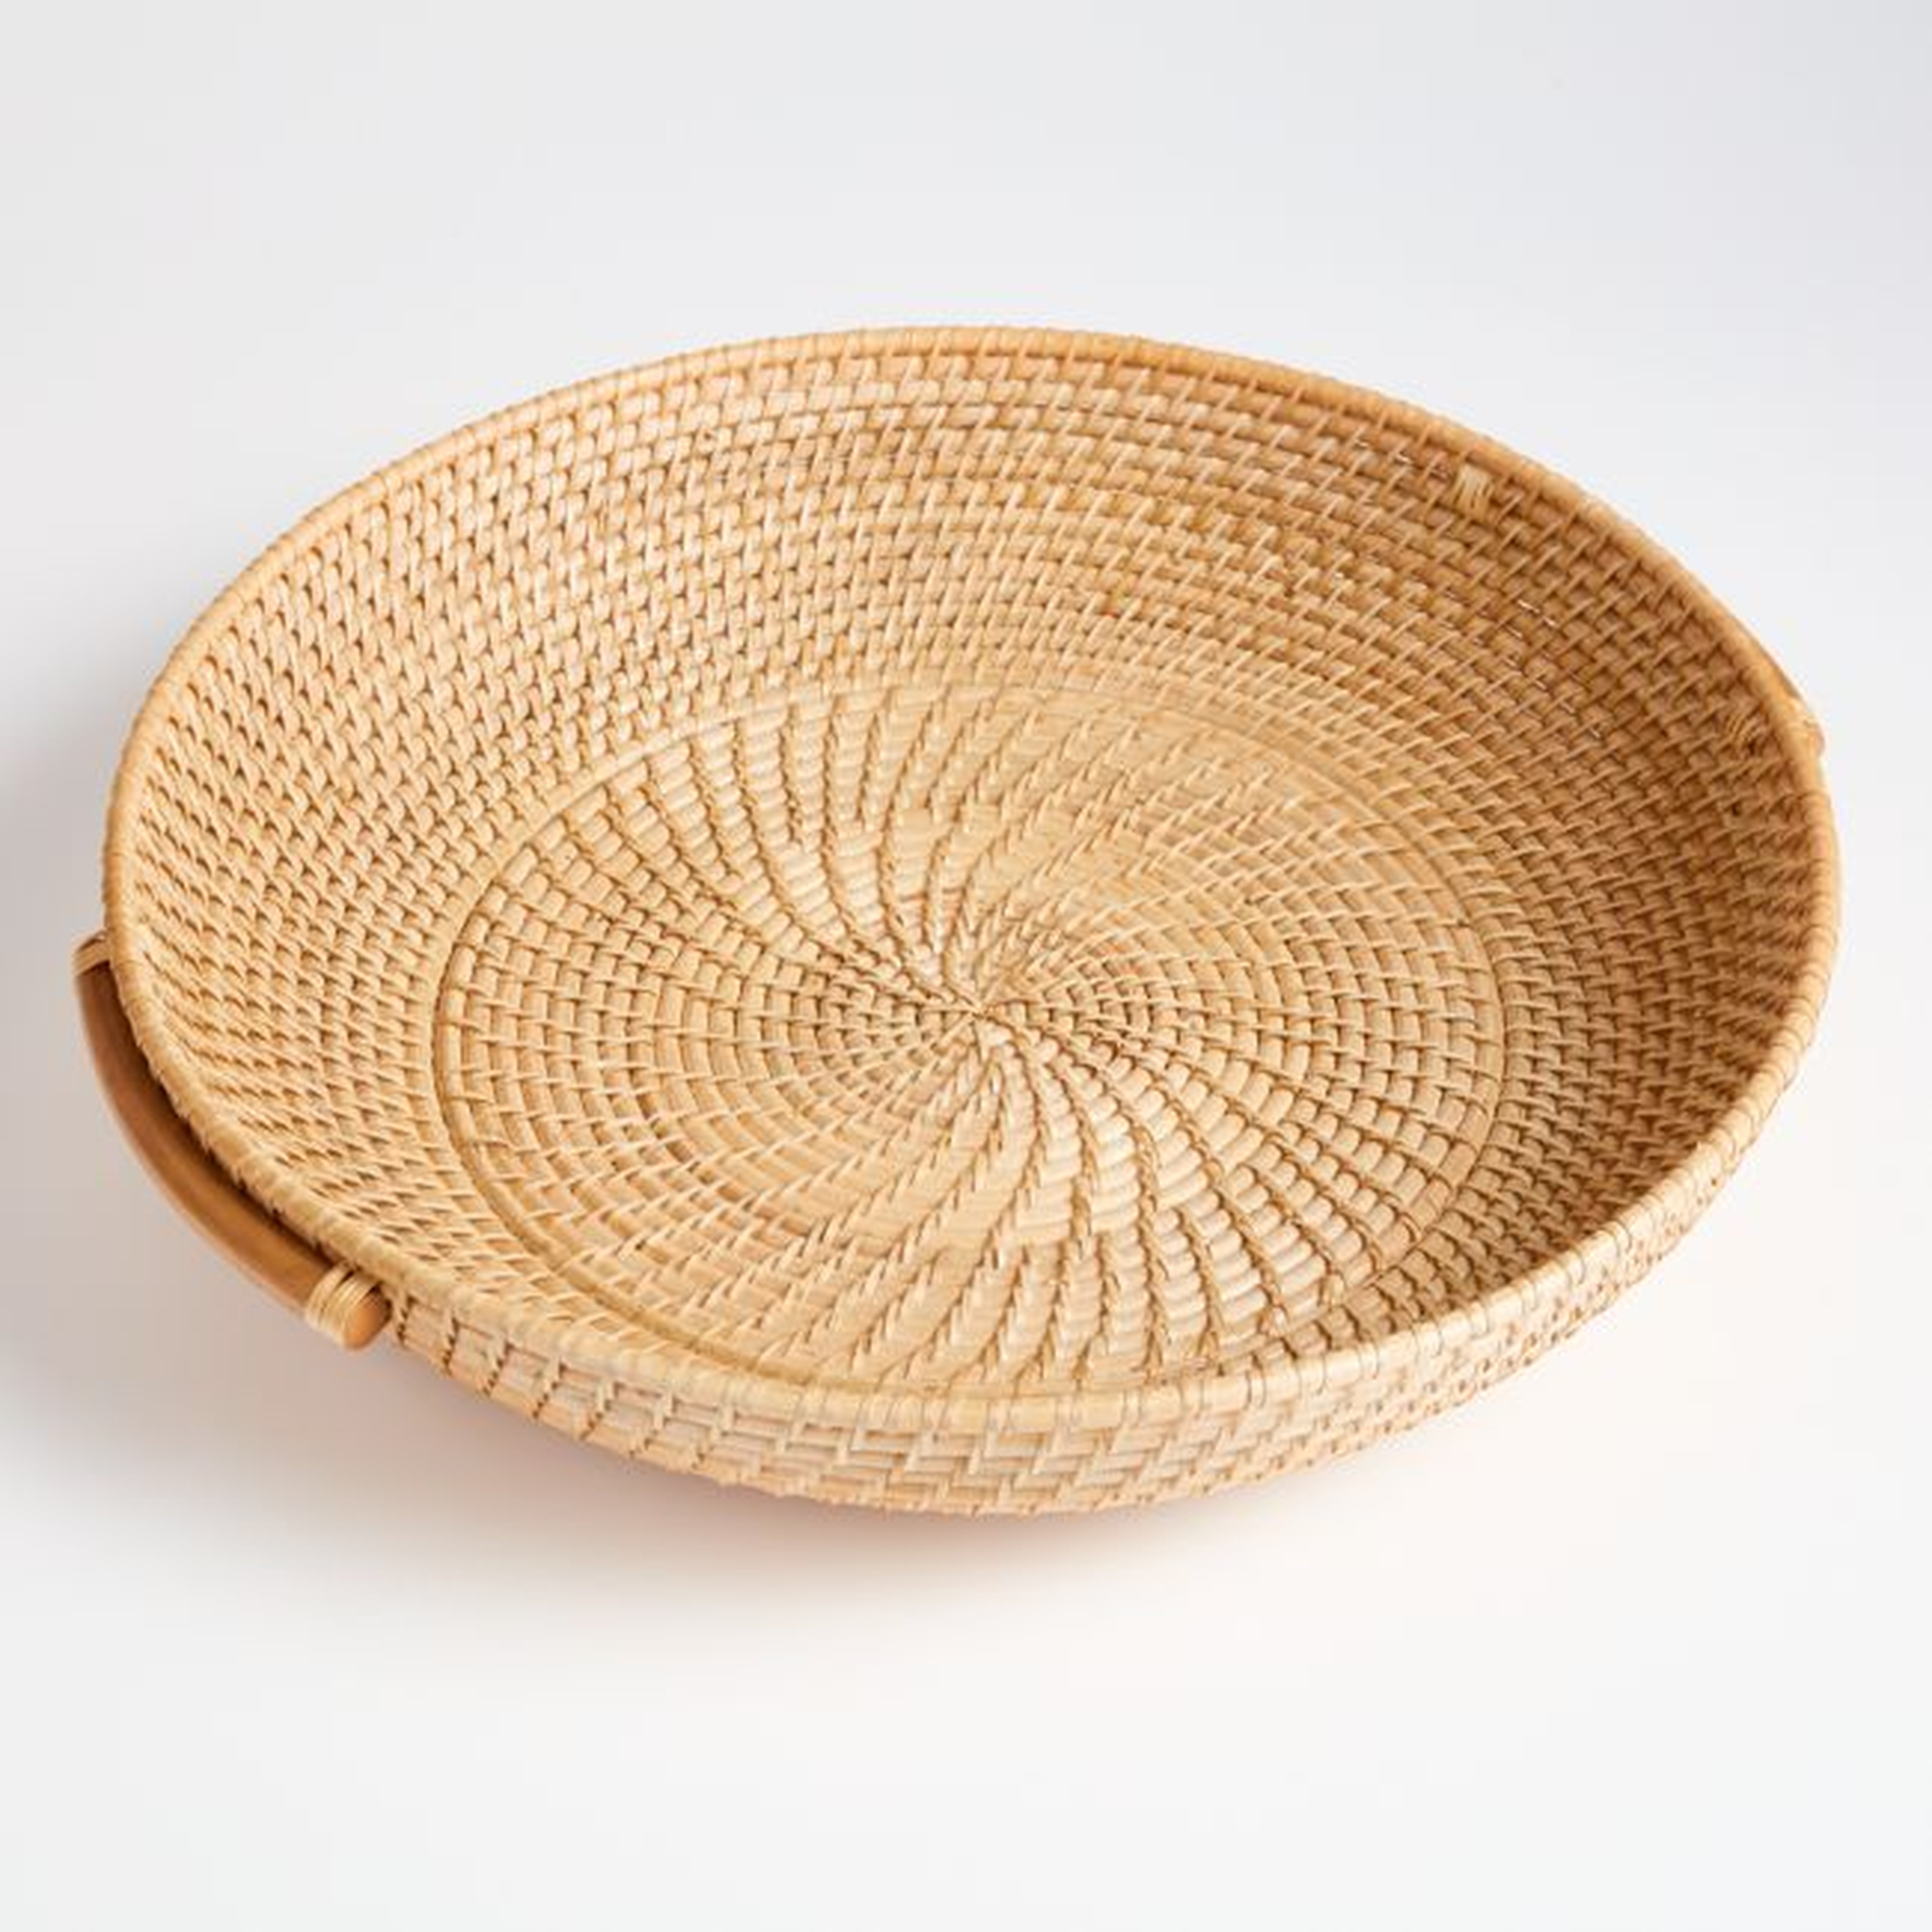 Artesia Natural Round Rattan Tray with Handles - Crate and Barrel